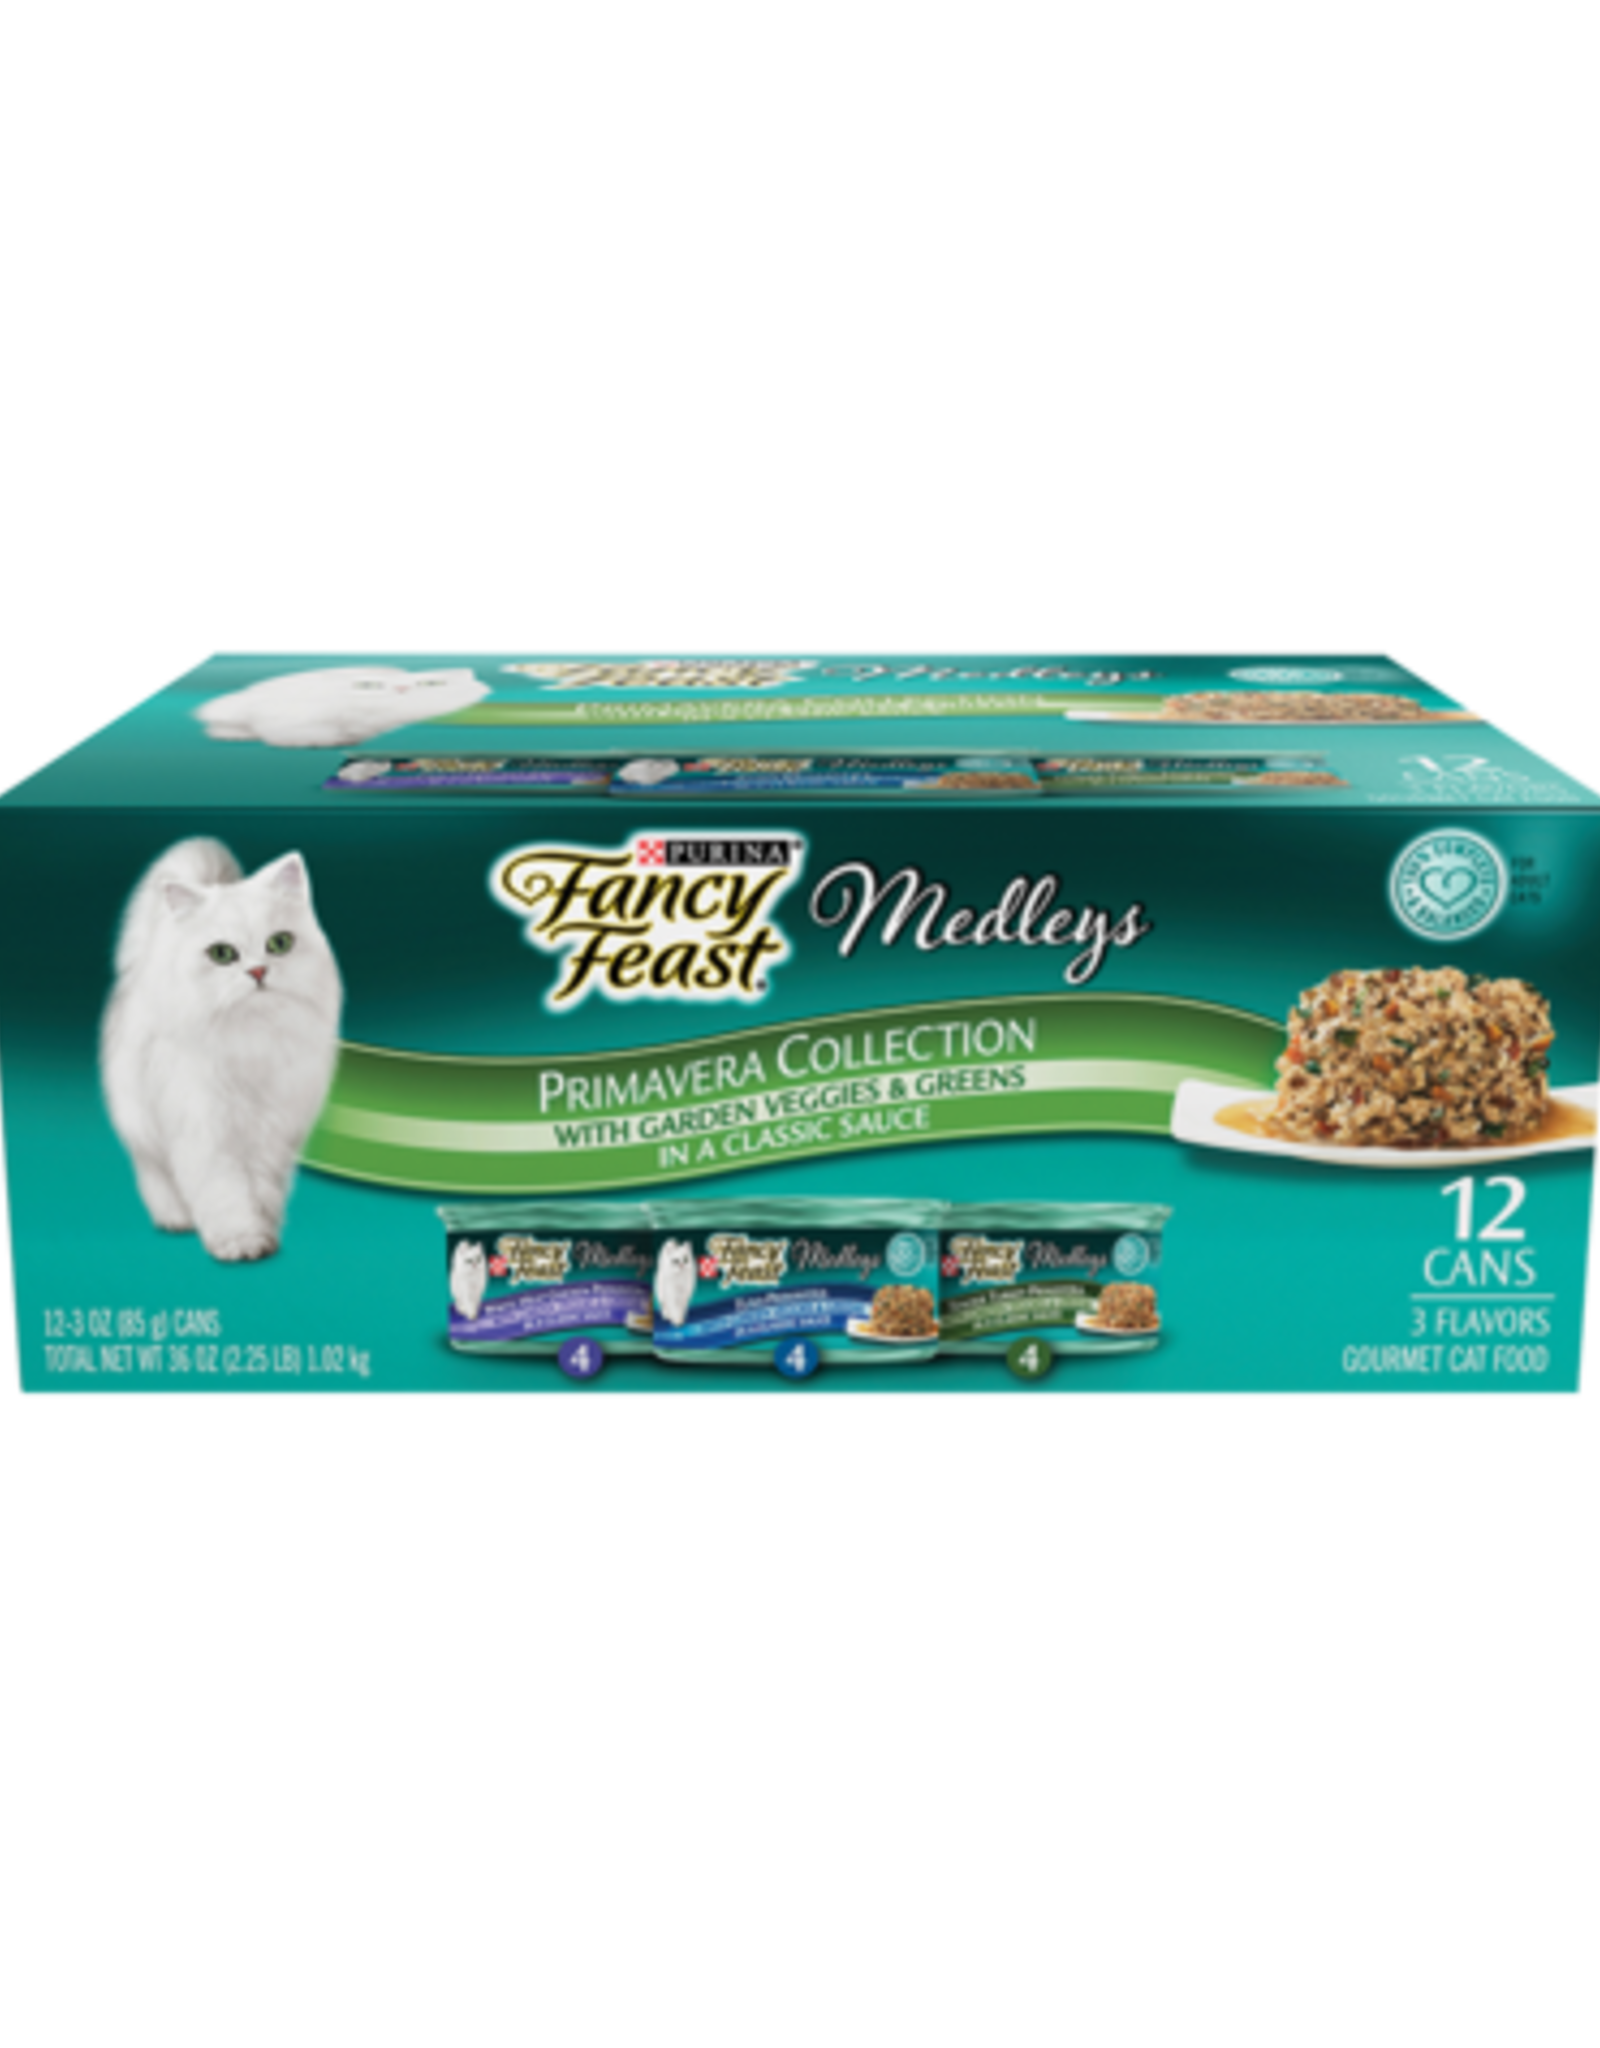 NESTLE PURINA PETCARE FANCY FEAST MEDLEYS PRIMAVERA VARIETY CANS 12 PACK